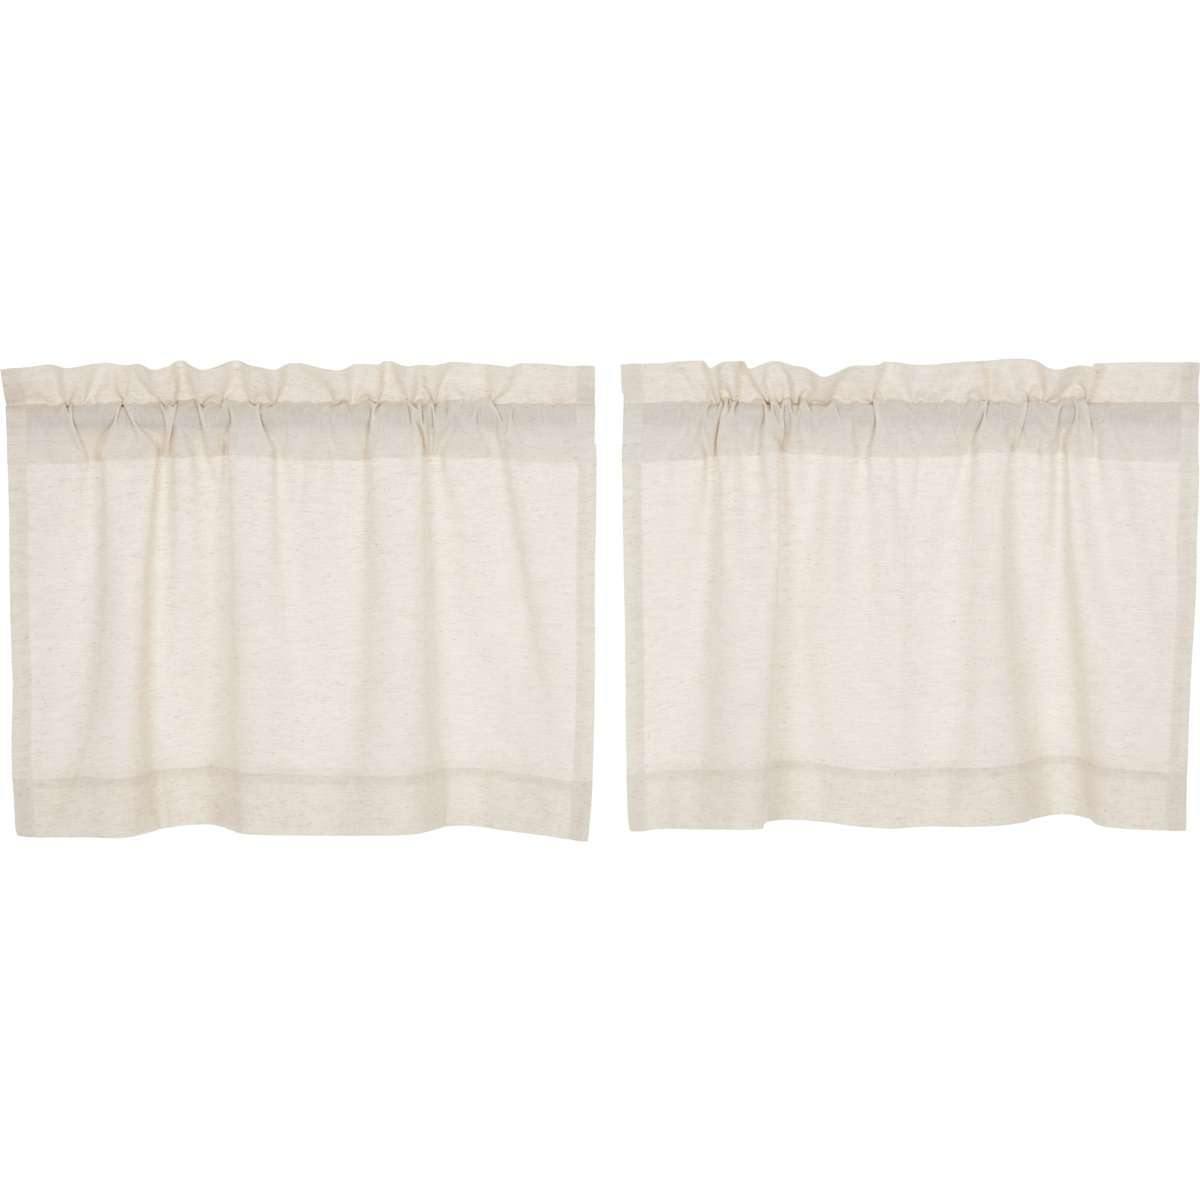 Simple Life Flax Natural Tier Curtain Set of 2 L24xW36 - The Fox Decor